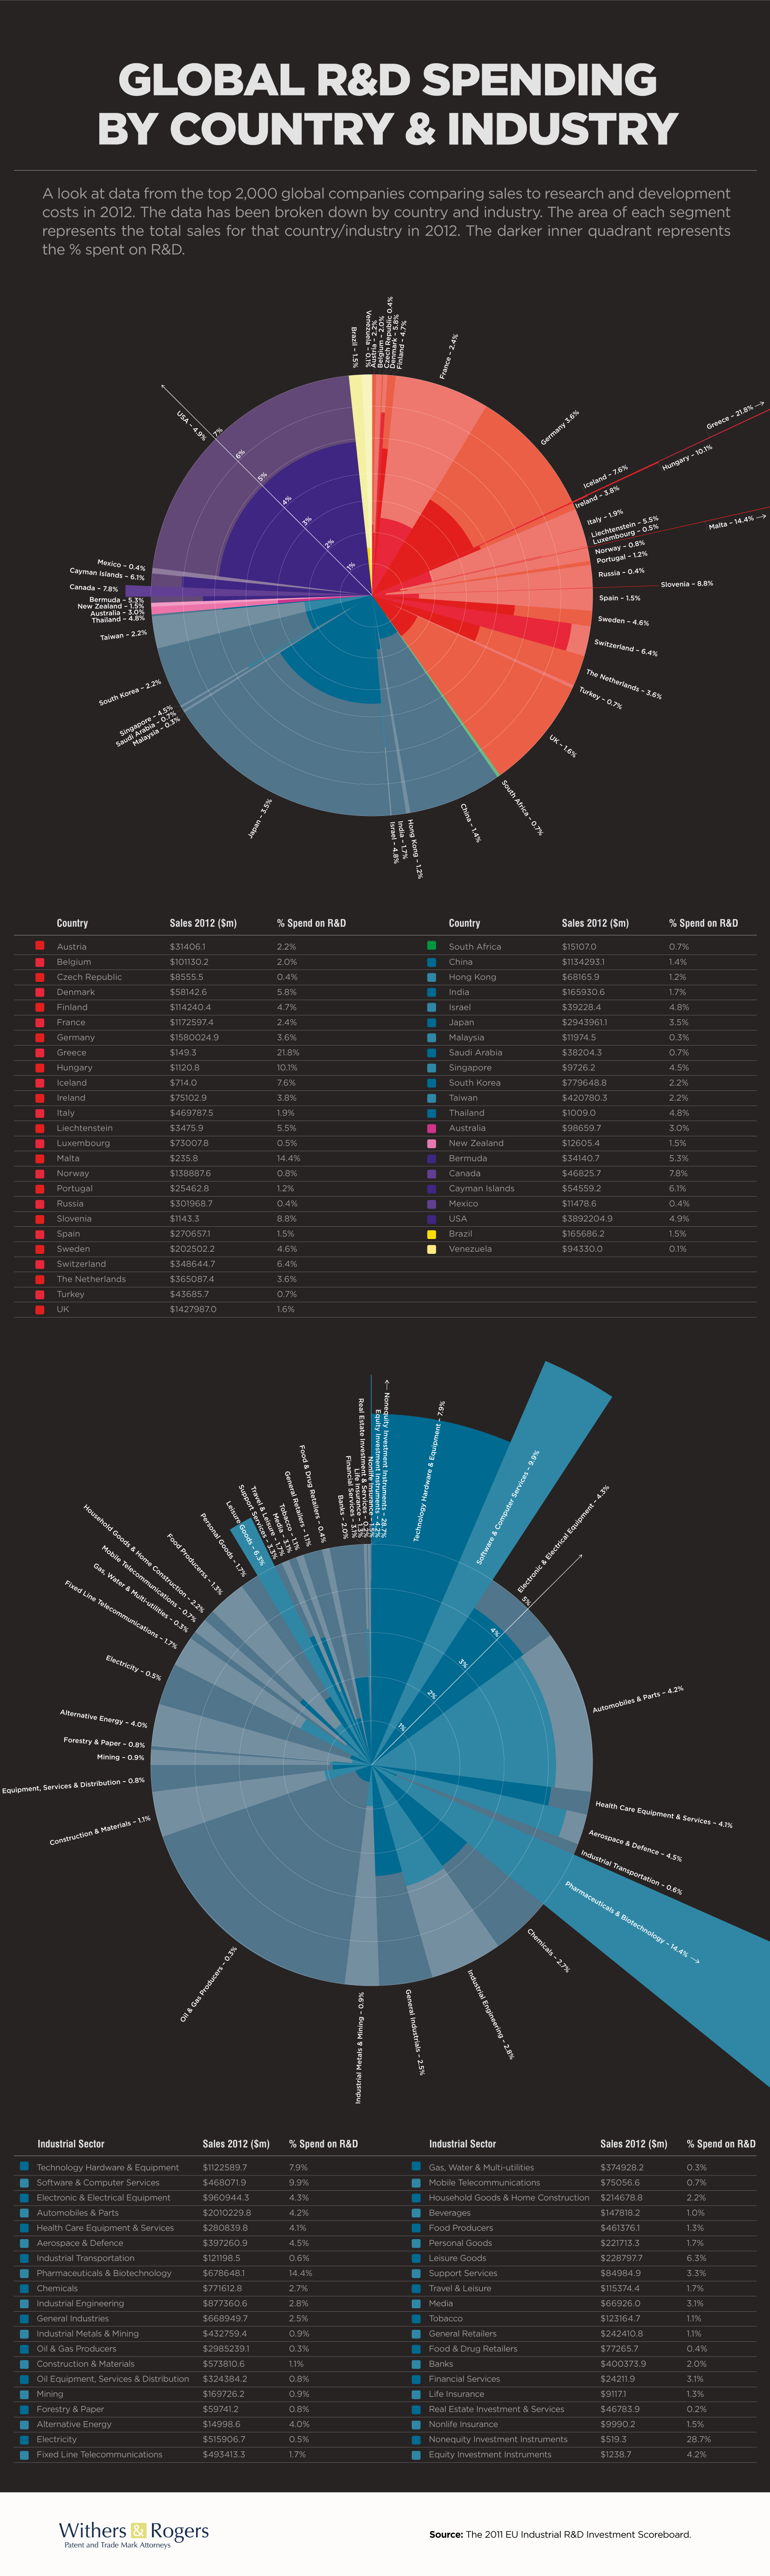 Global R&D Spending by Country & Industry Visual.ly